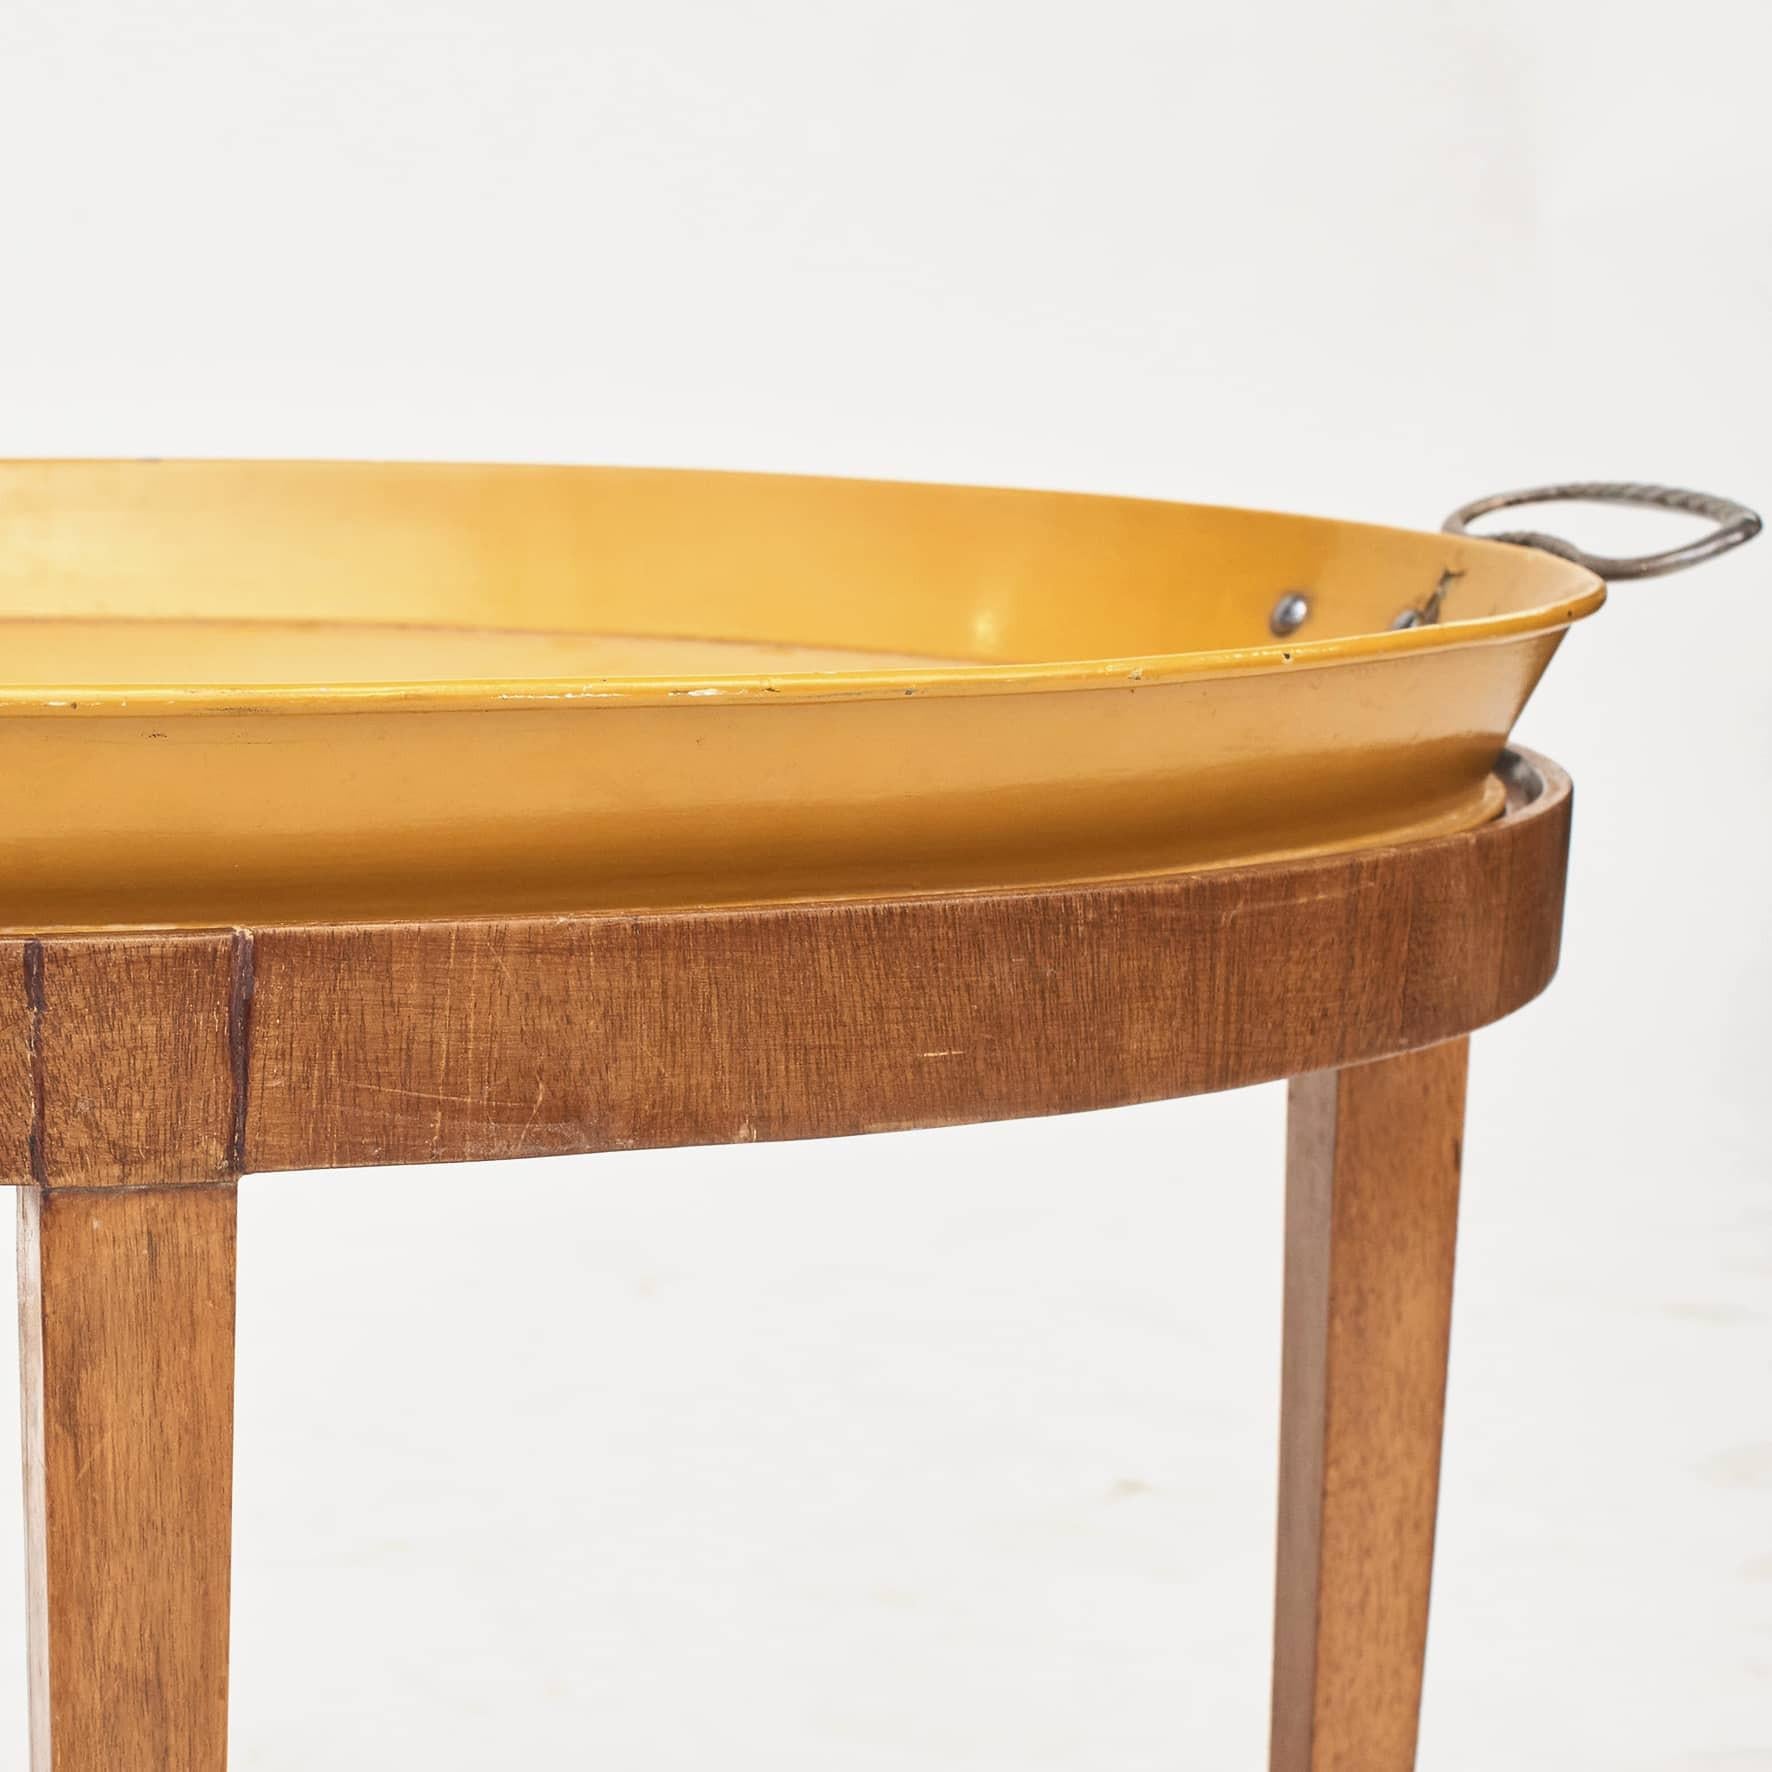 Danish Empire Yellow Metal Tray Table, Denmark Early 19th Century For Sale 3